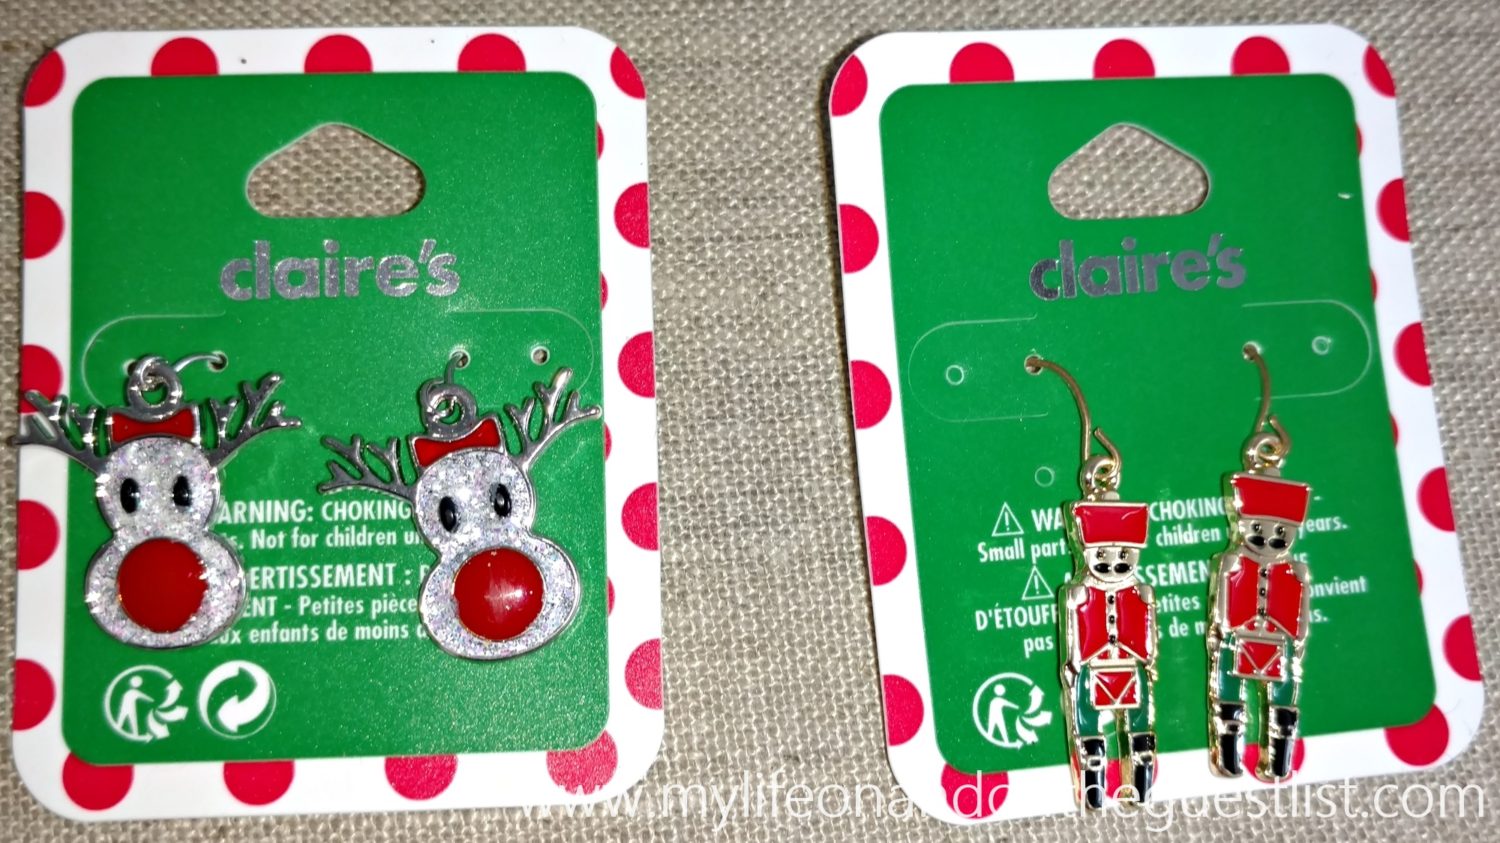 Stuff Their Holiday Stockings with These Claire's Christmas Gifts